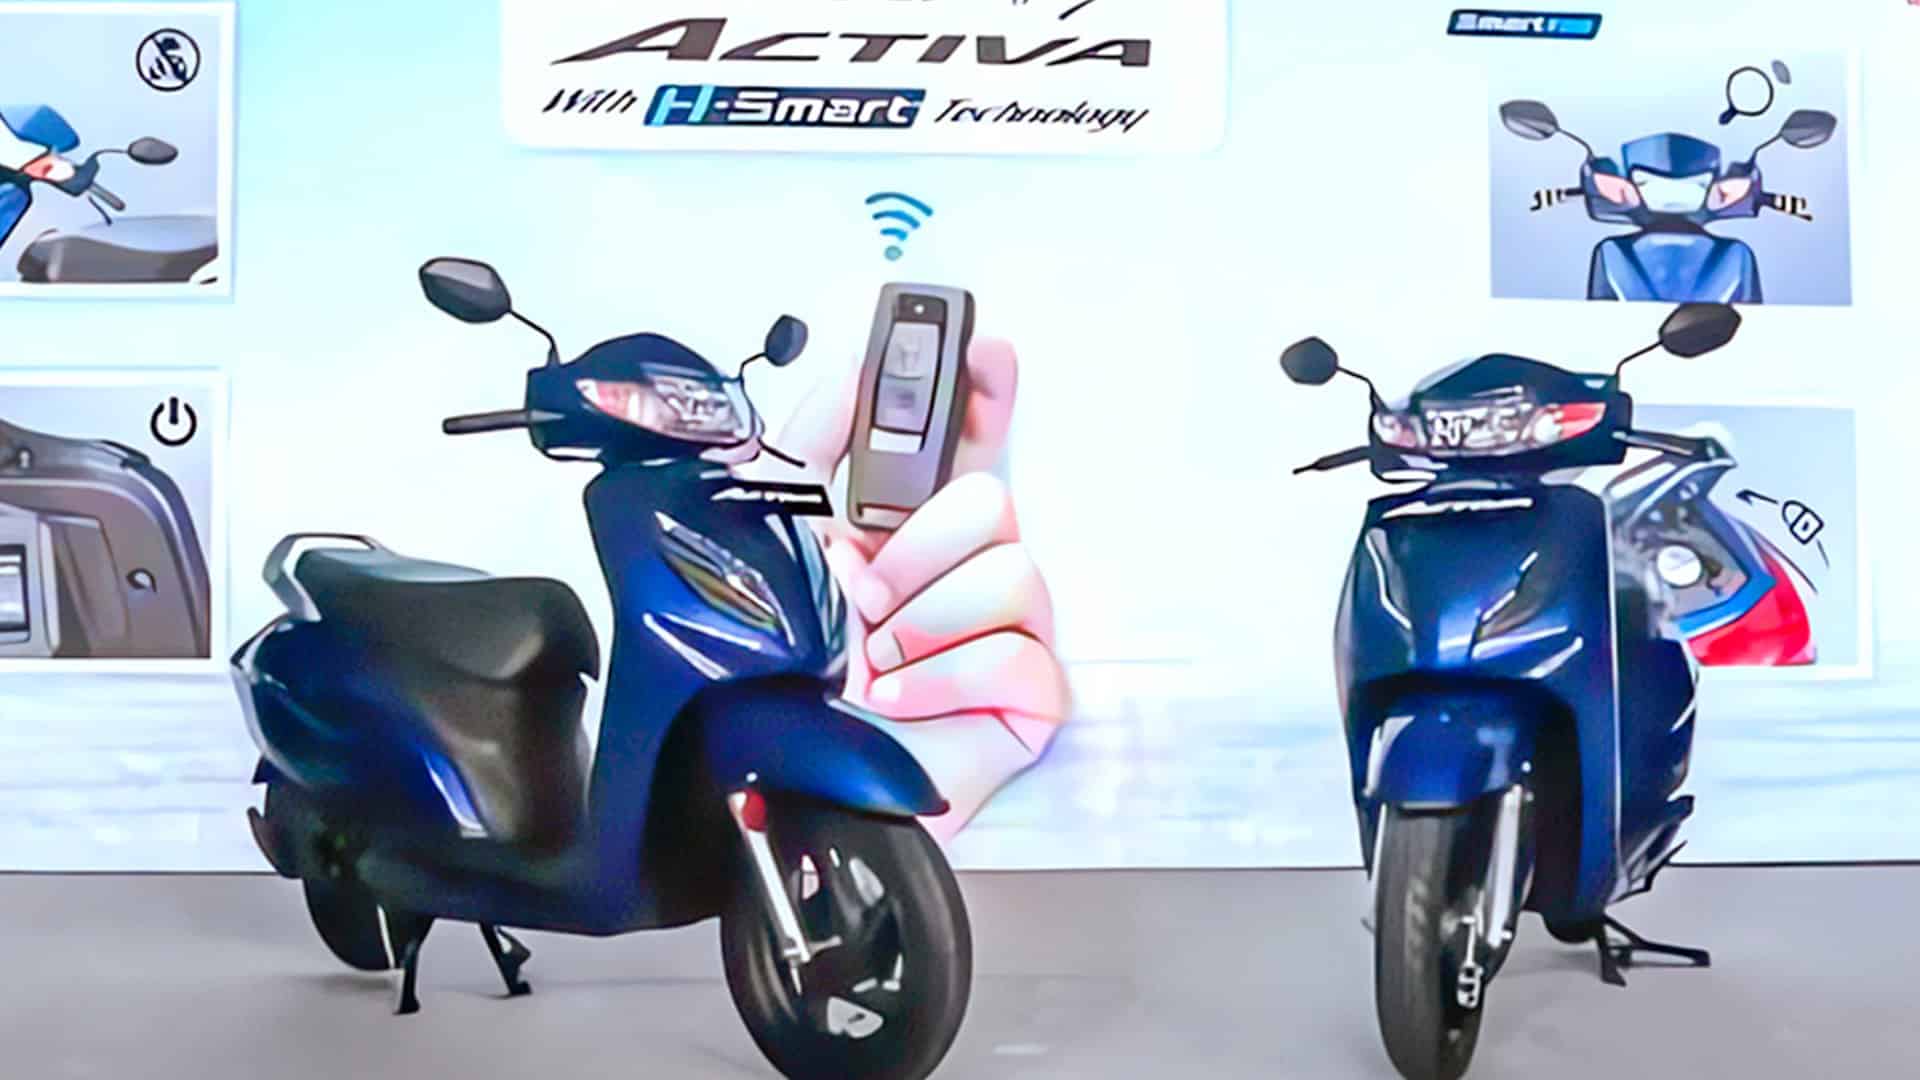 Honda launches new Activa at starting price of Rs 74,536